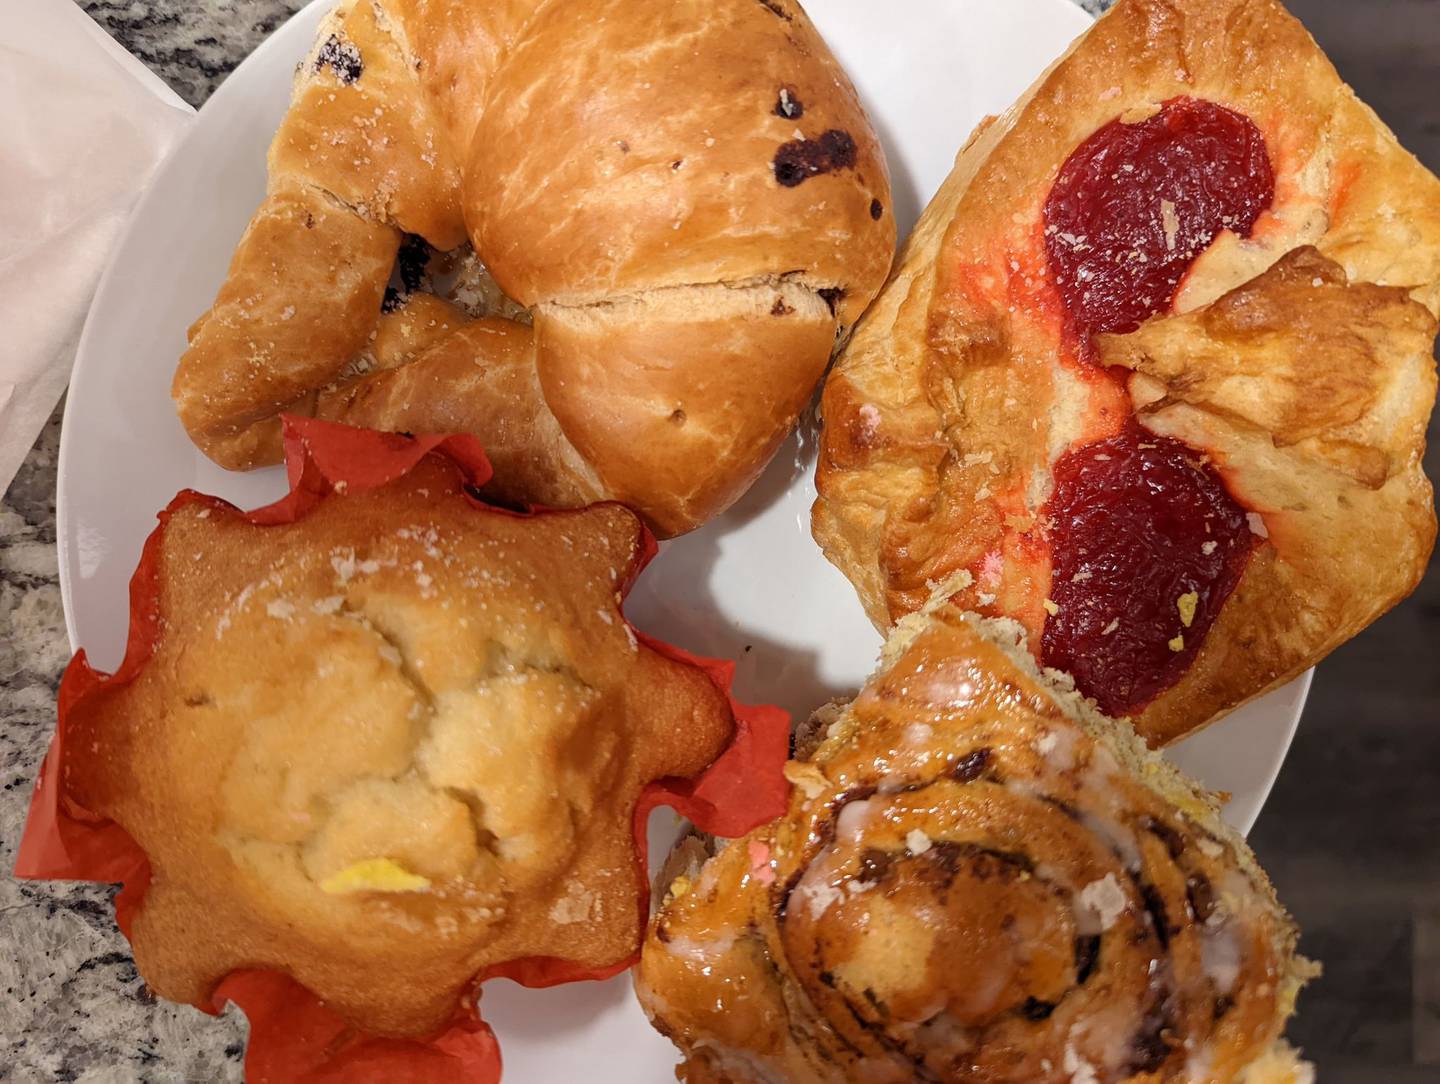 La Chicanita Bakery in Crest Hill offers a wide variety of homemade breads and pastries, juices, sandwiches and custom cakes. Pictured, clockwise, is a chocolate croissant, fruit and cheese danish, anise-flavored coffee cake and a lemon muffin.